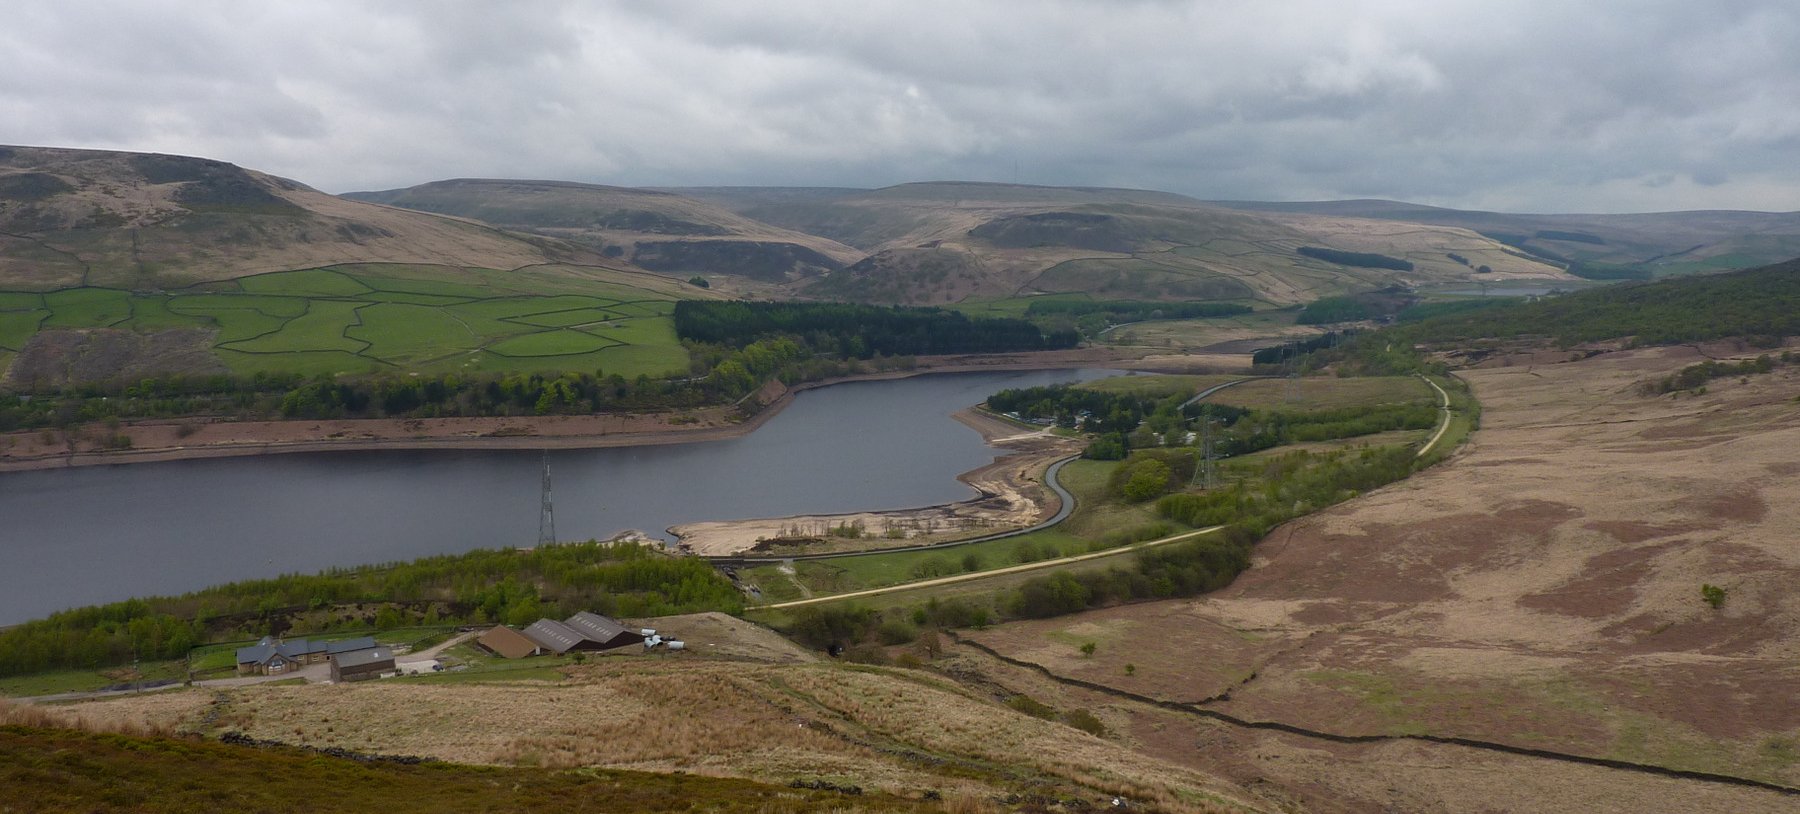 Looking down onto Torside Reservoir, almost done for the day